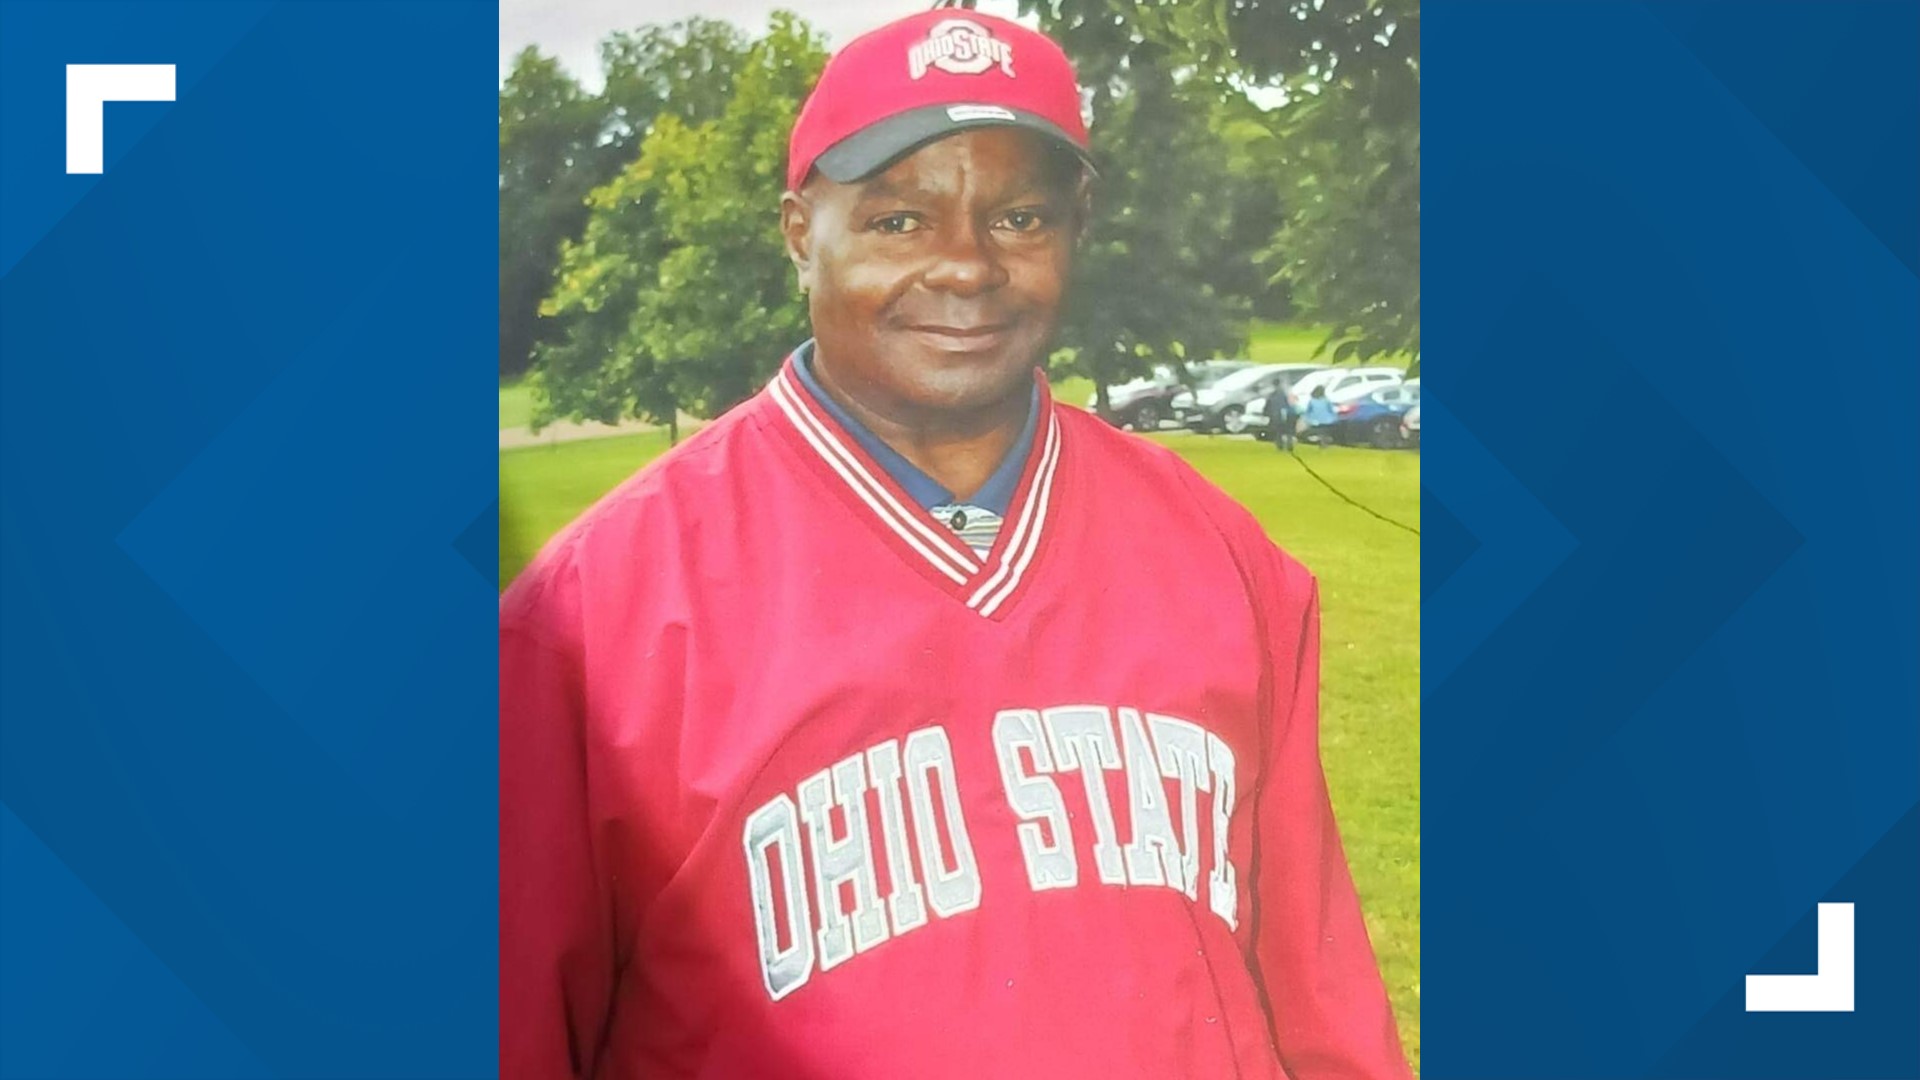 William Moore Jr., 66, was riding his bicycle along South Hamilton Road last Tuesday when he was struck and killed.